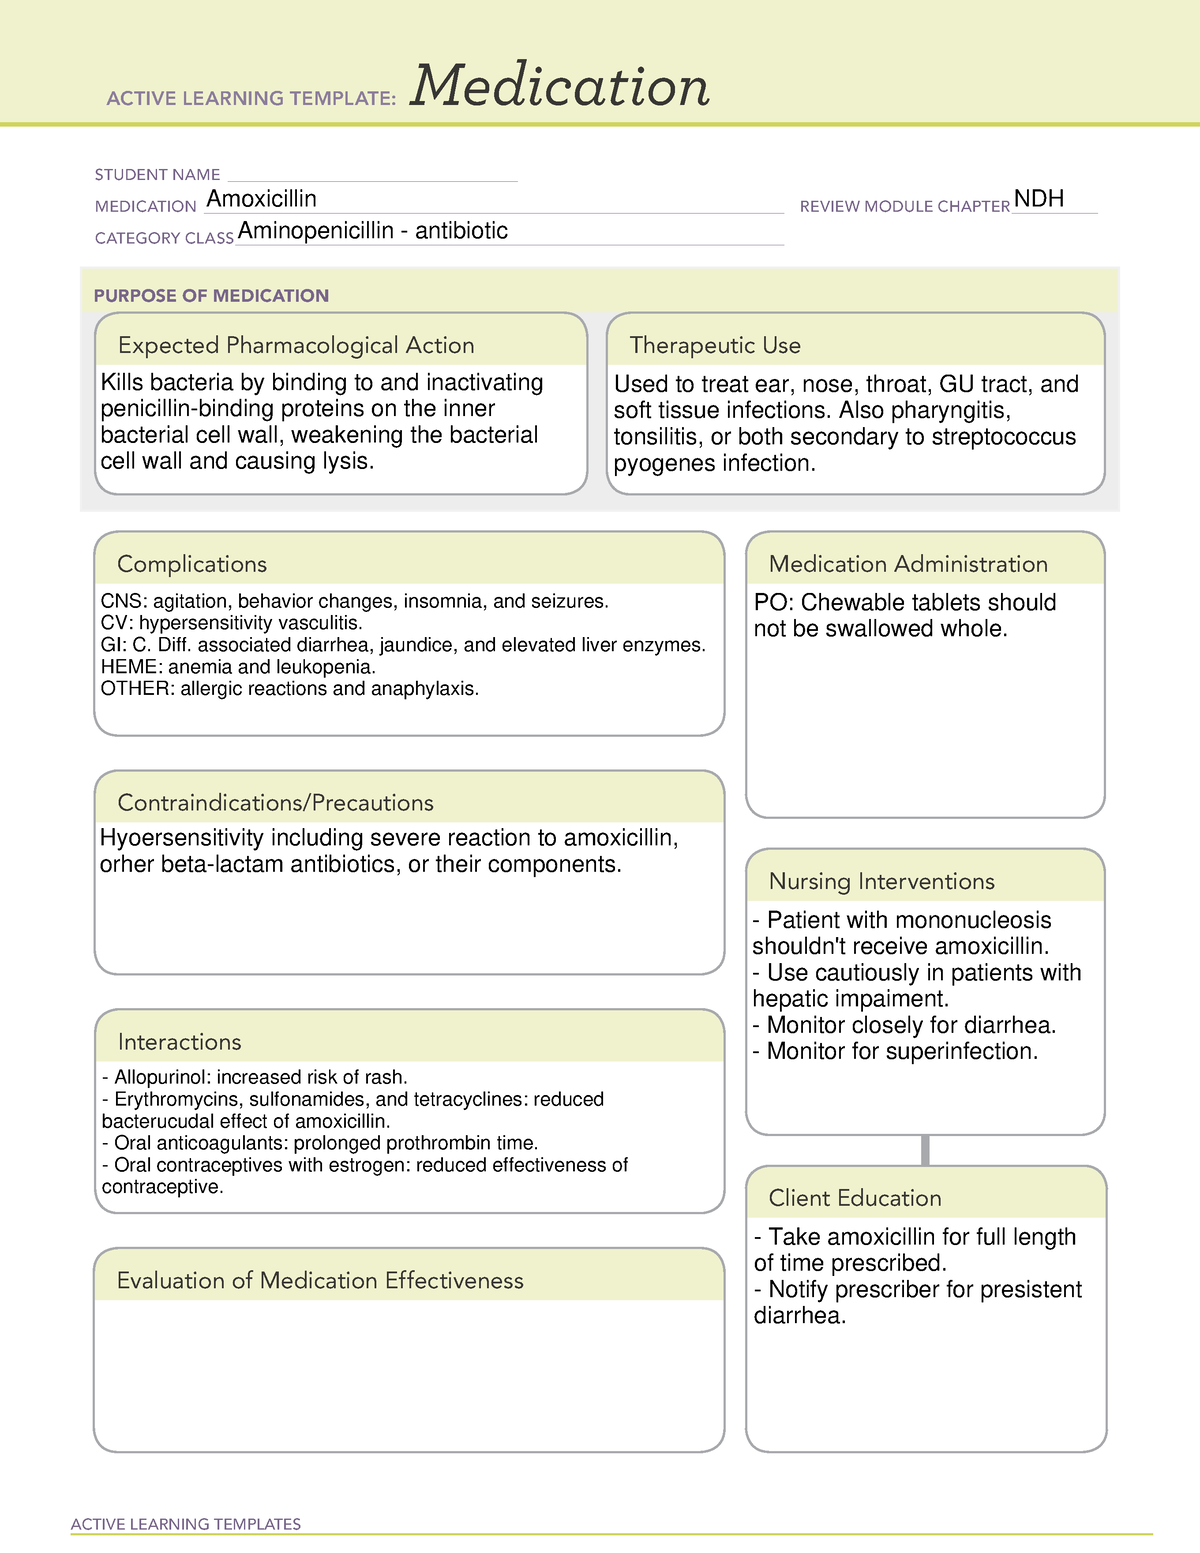 Amoxicillin Medication template ACTIVE LEARNING TEMPLATES